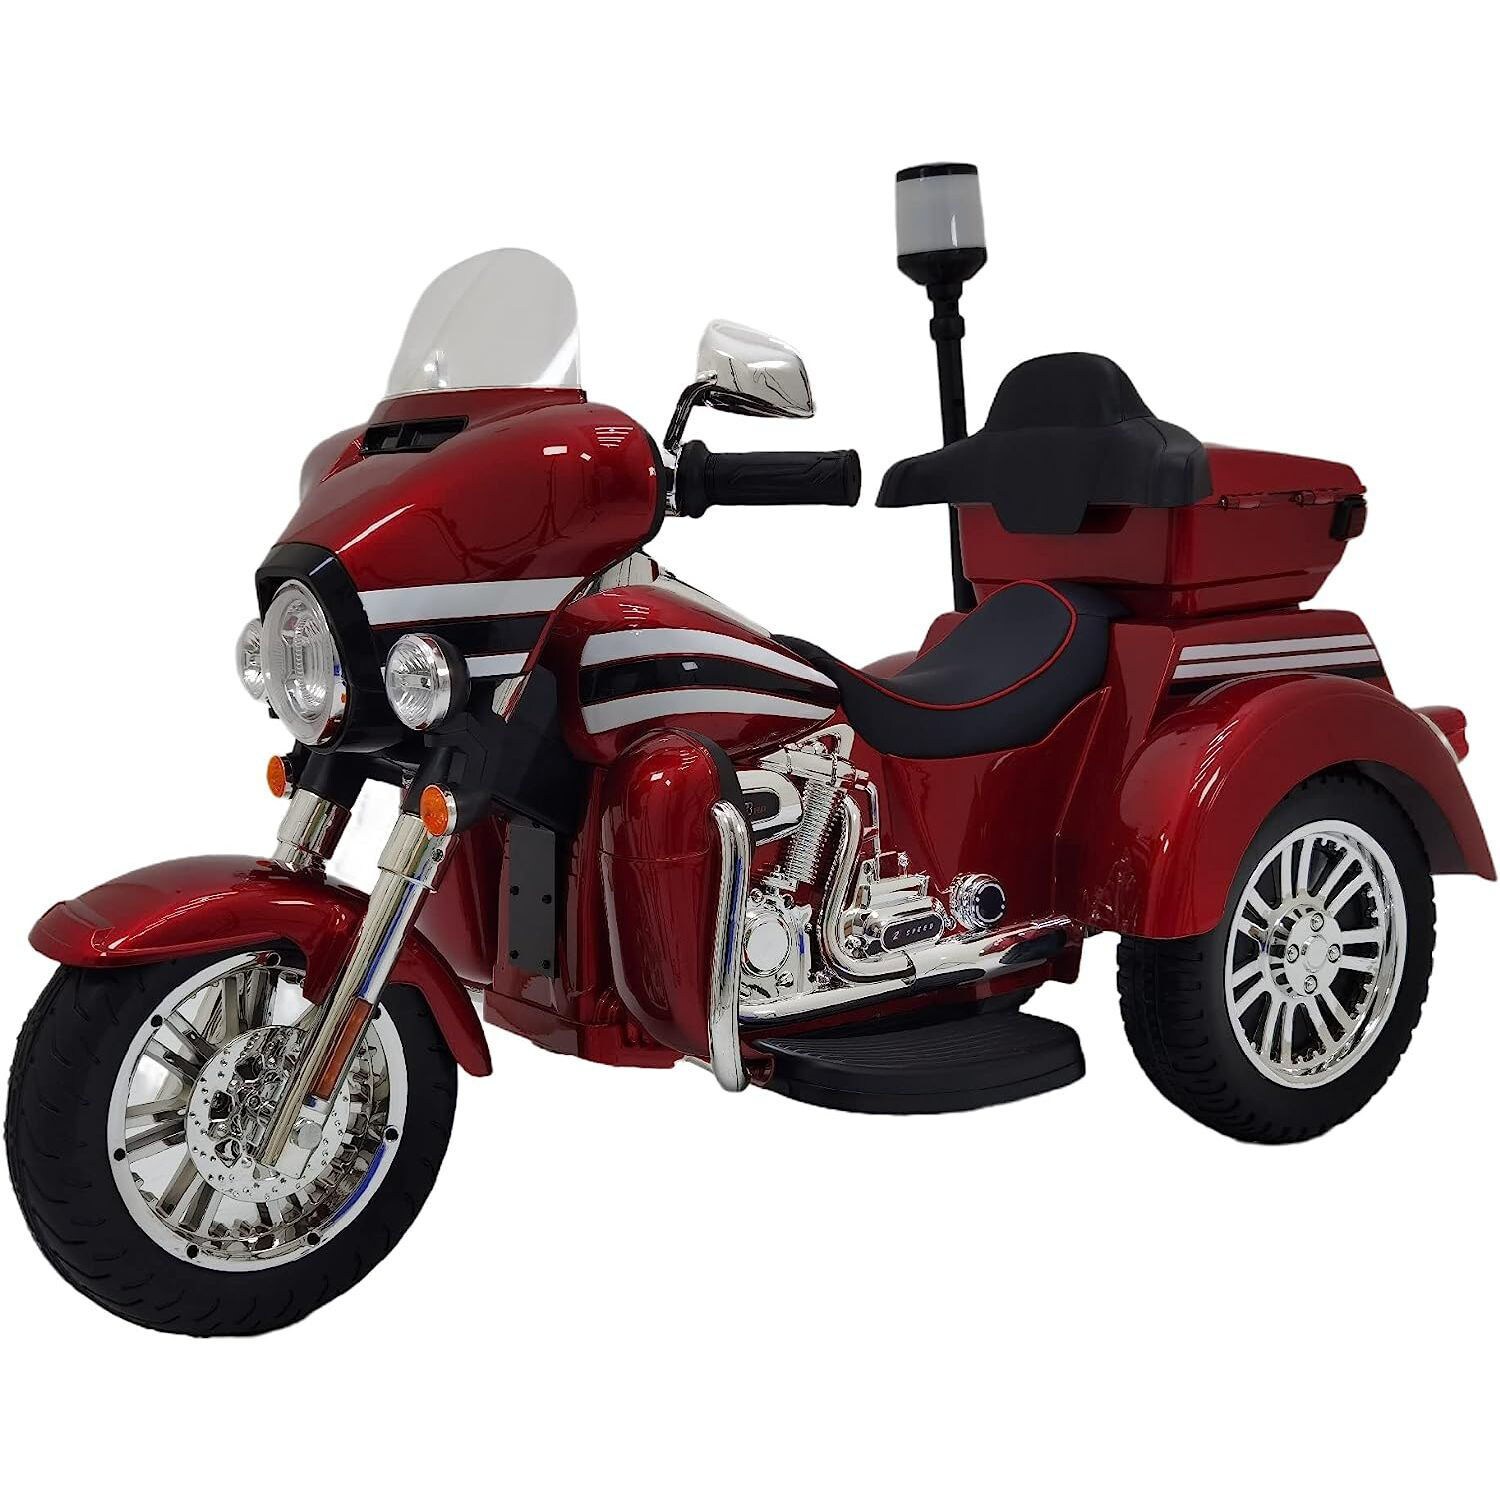 HD Type Motorcycle (Red) ZY Toys - Machinegun